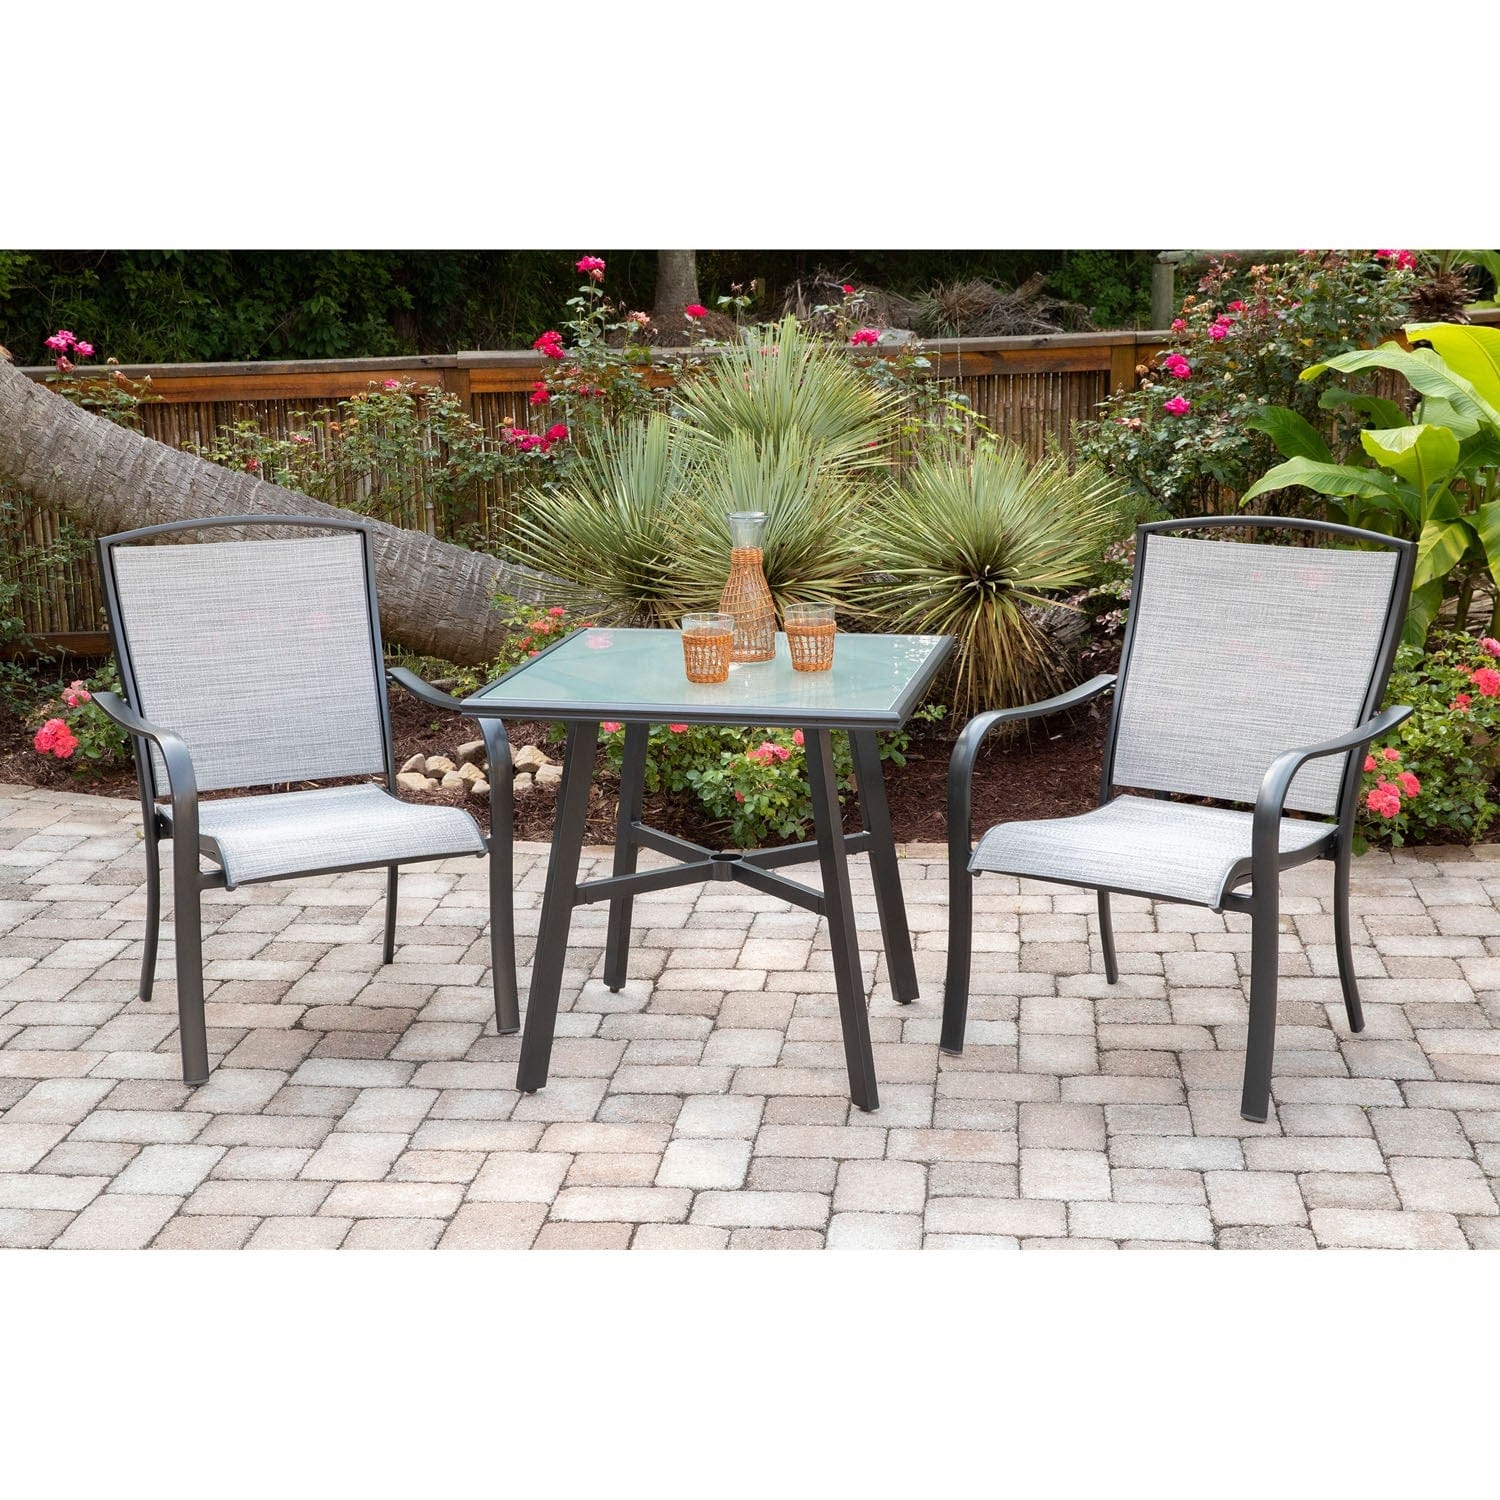 Hanover Bistro Set Hanover - Foxhill 3pc Dining Set: 2 Sling Dining Chairs and 1 30" Sq Glass Table | FOXDN3PCG-GRY